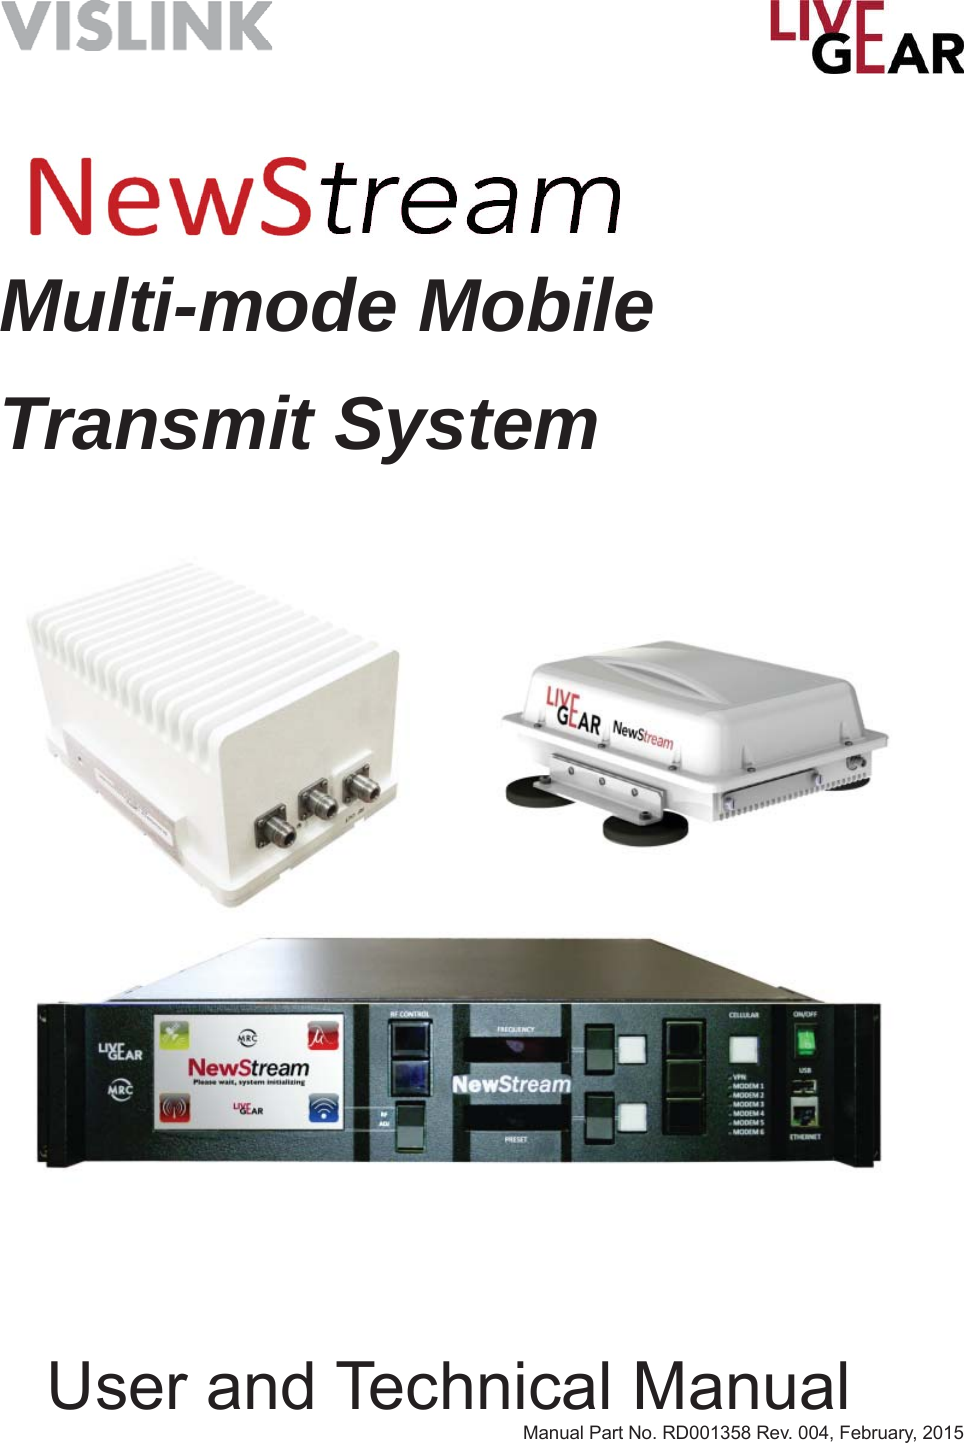 Multi-mode Mobile  Transmit System  User and Technical ManualManual Part No. RD001358 Rev. 004, February, 2015